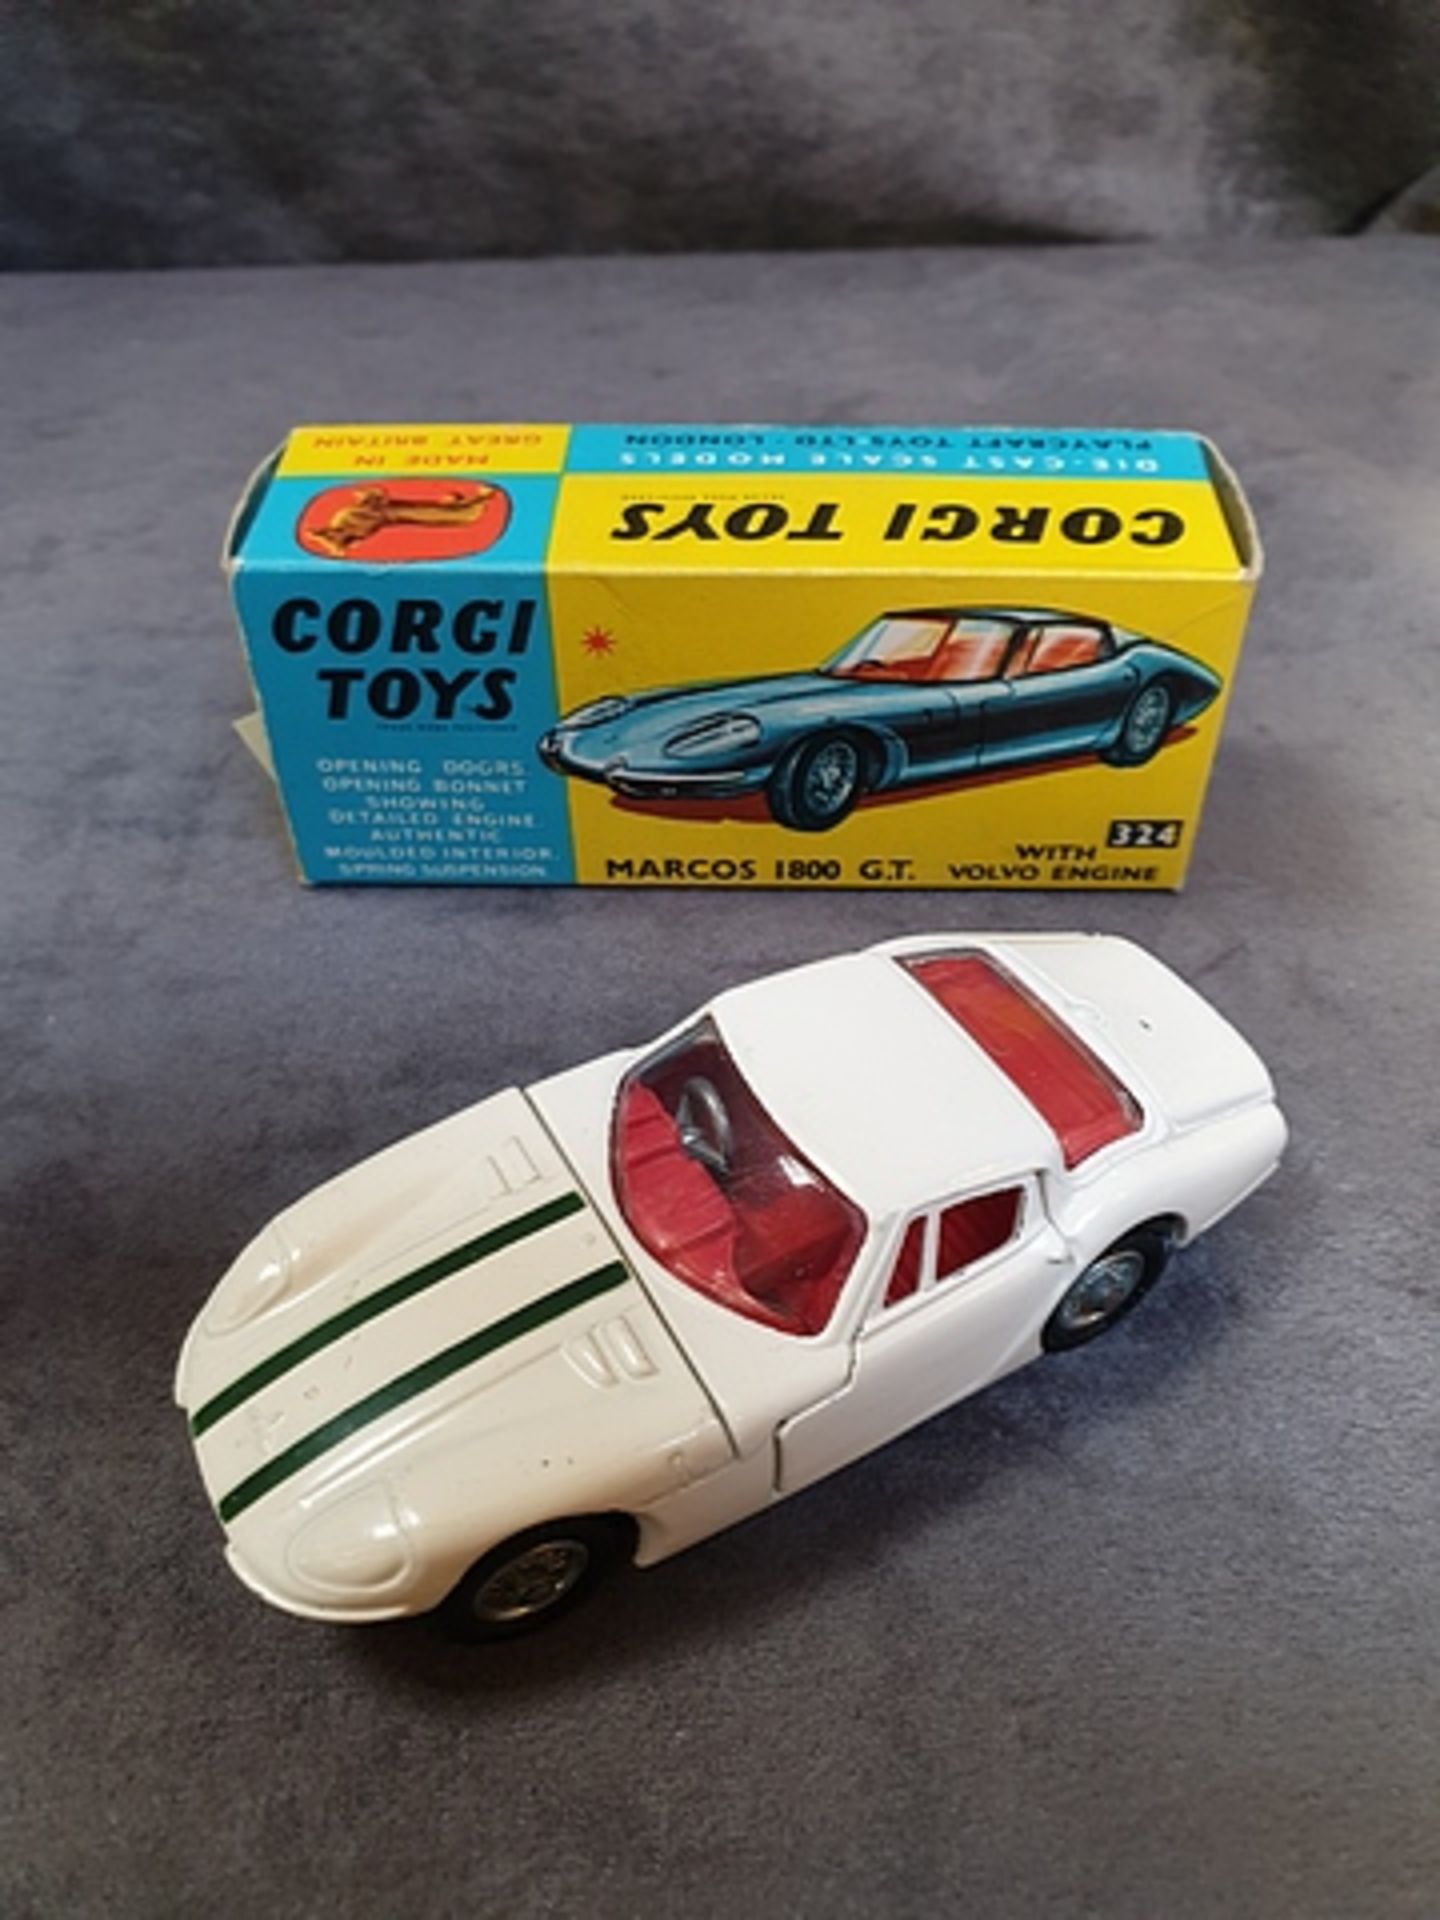 Corgi Toys diecast # 324 Marcos 1800GT with Volvo Engine white with green stripes an red interior